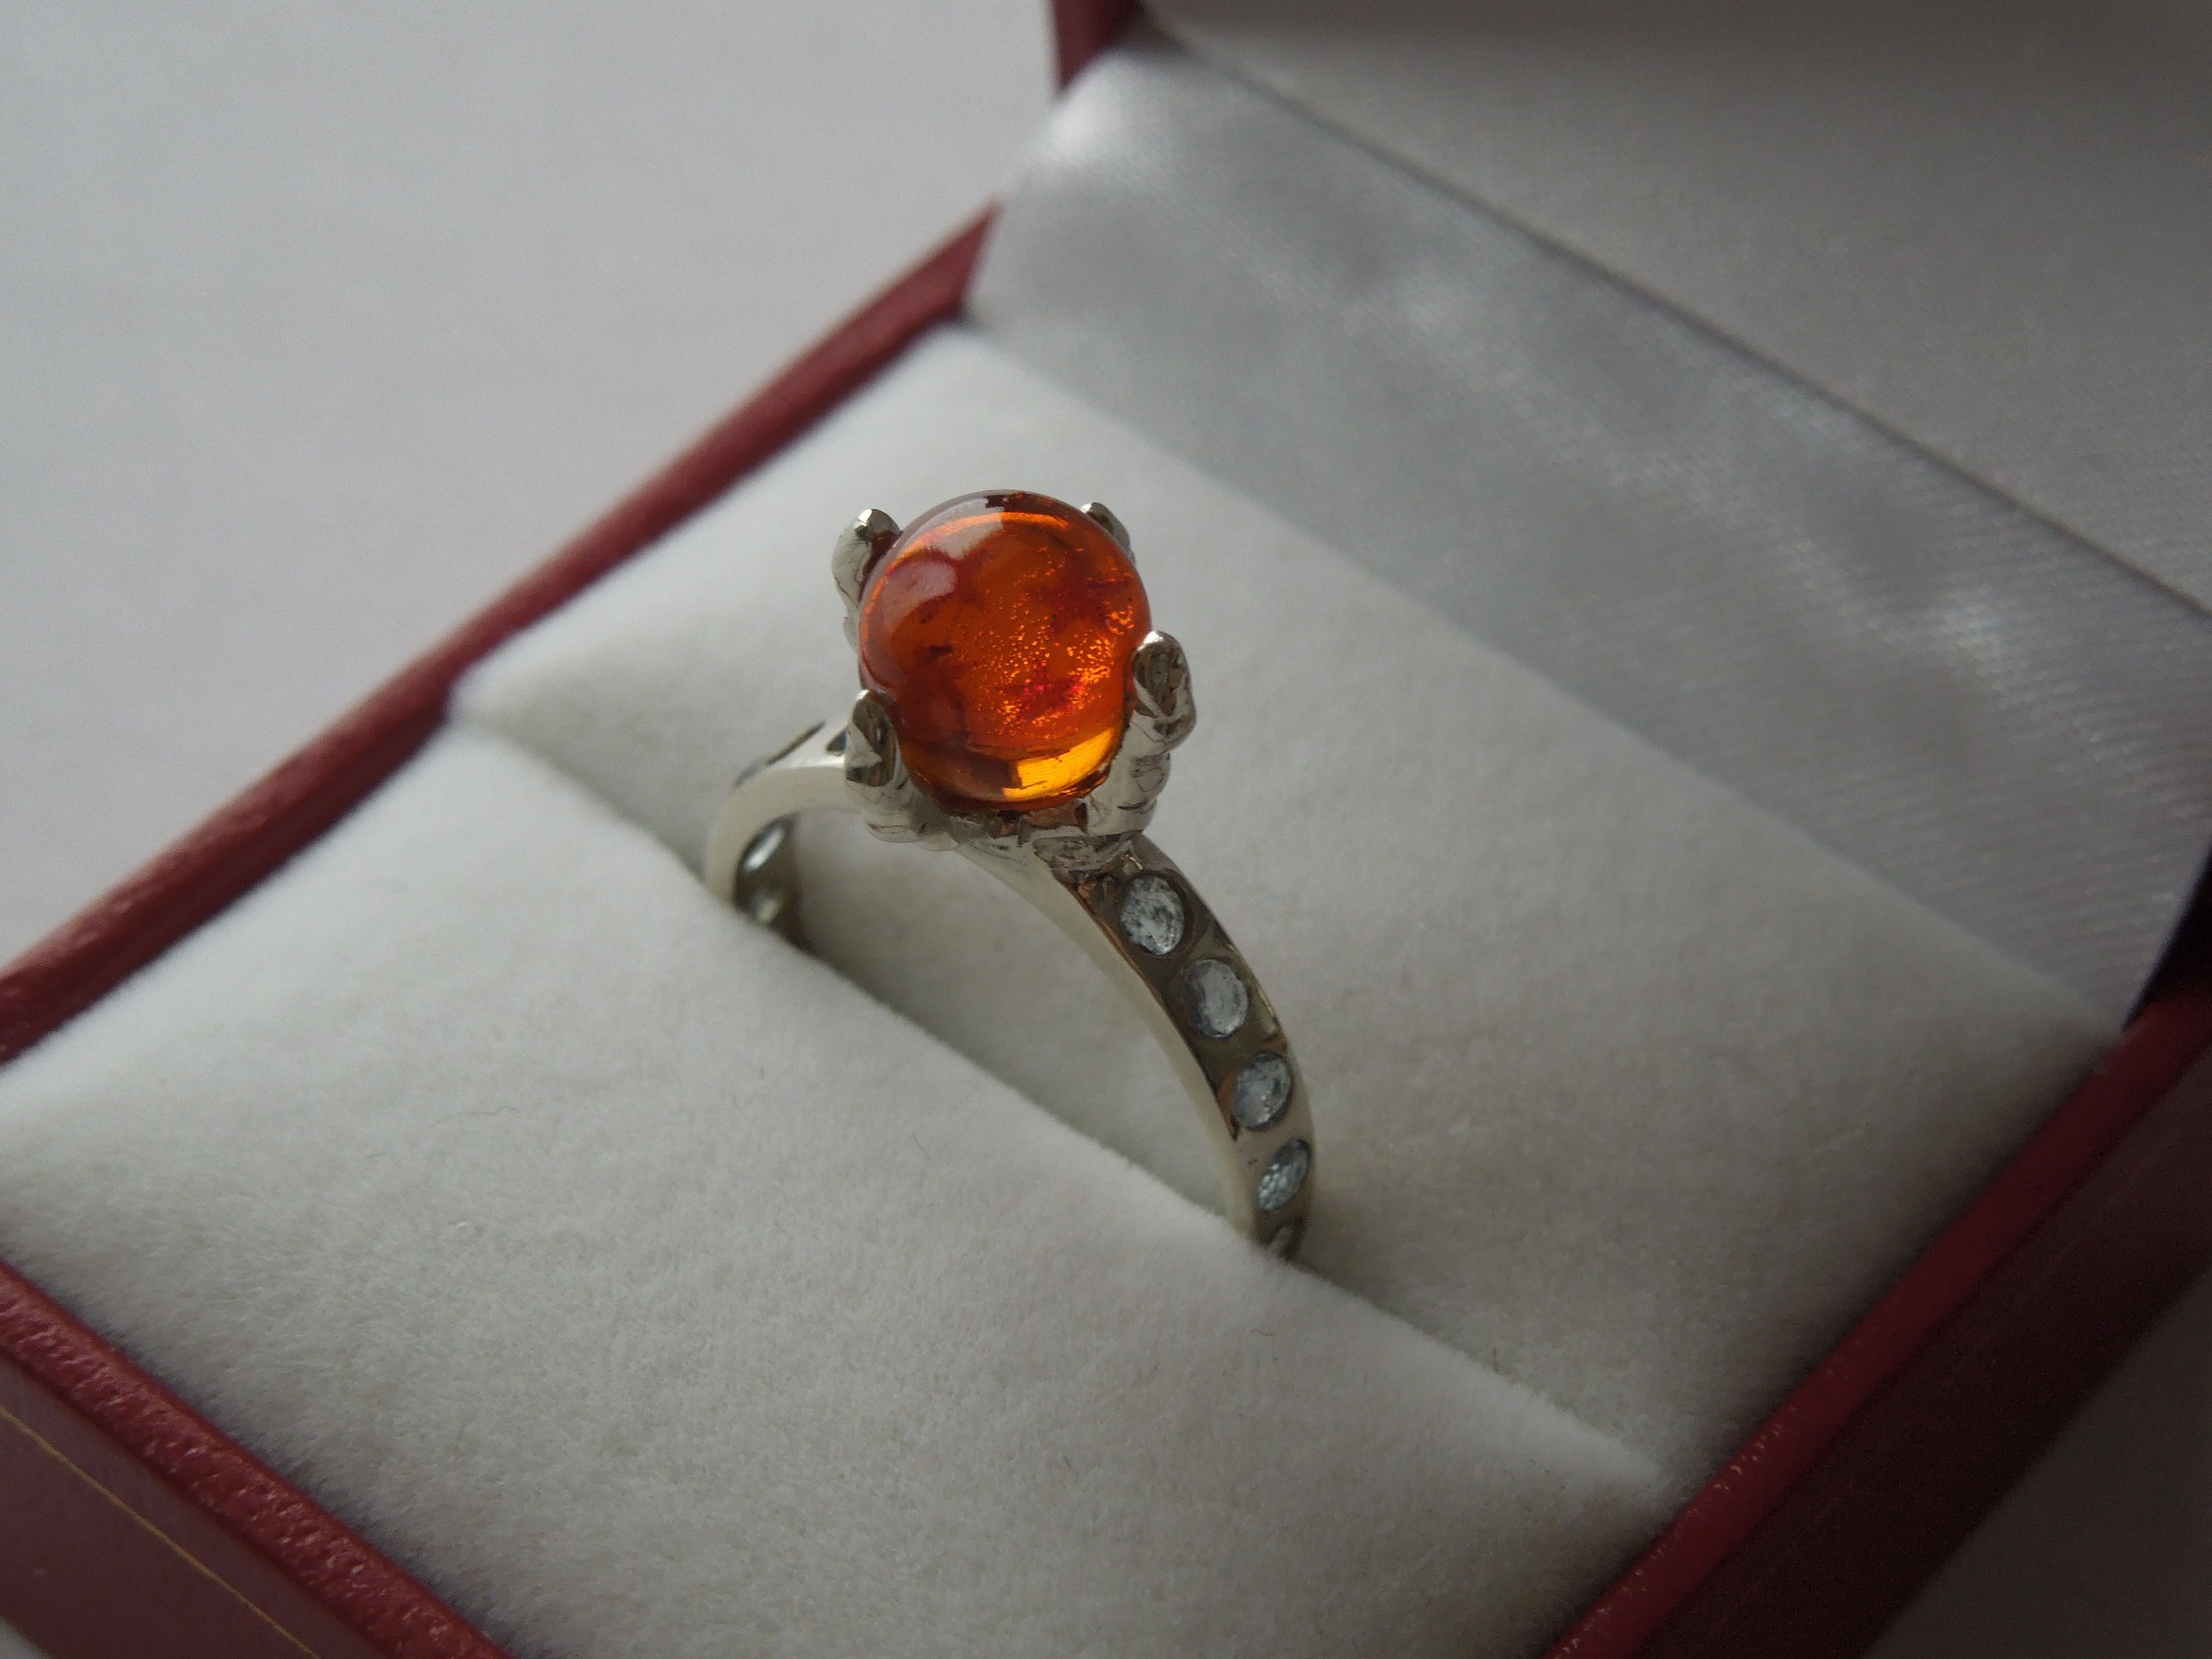 Custom Dragonball Z Engagement Ring by Cicmil Crowns | CustomMade.com